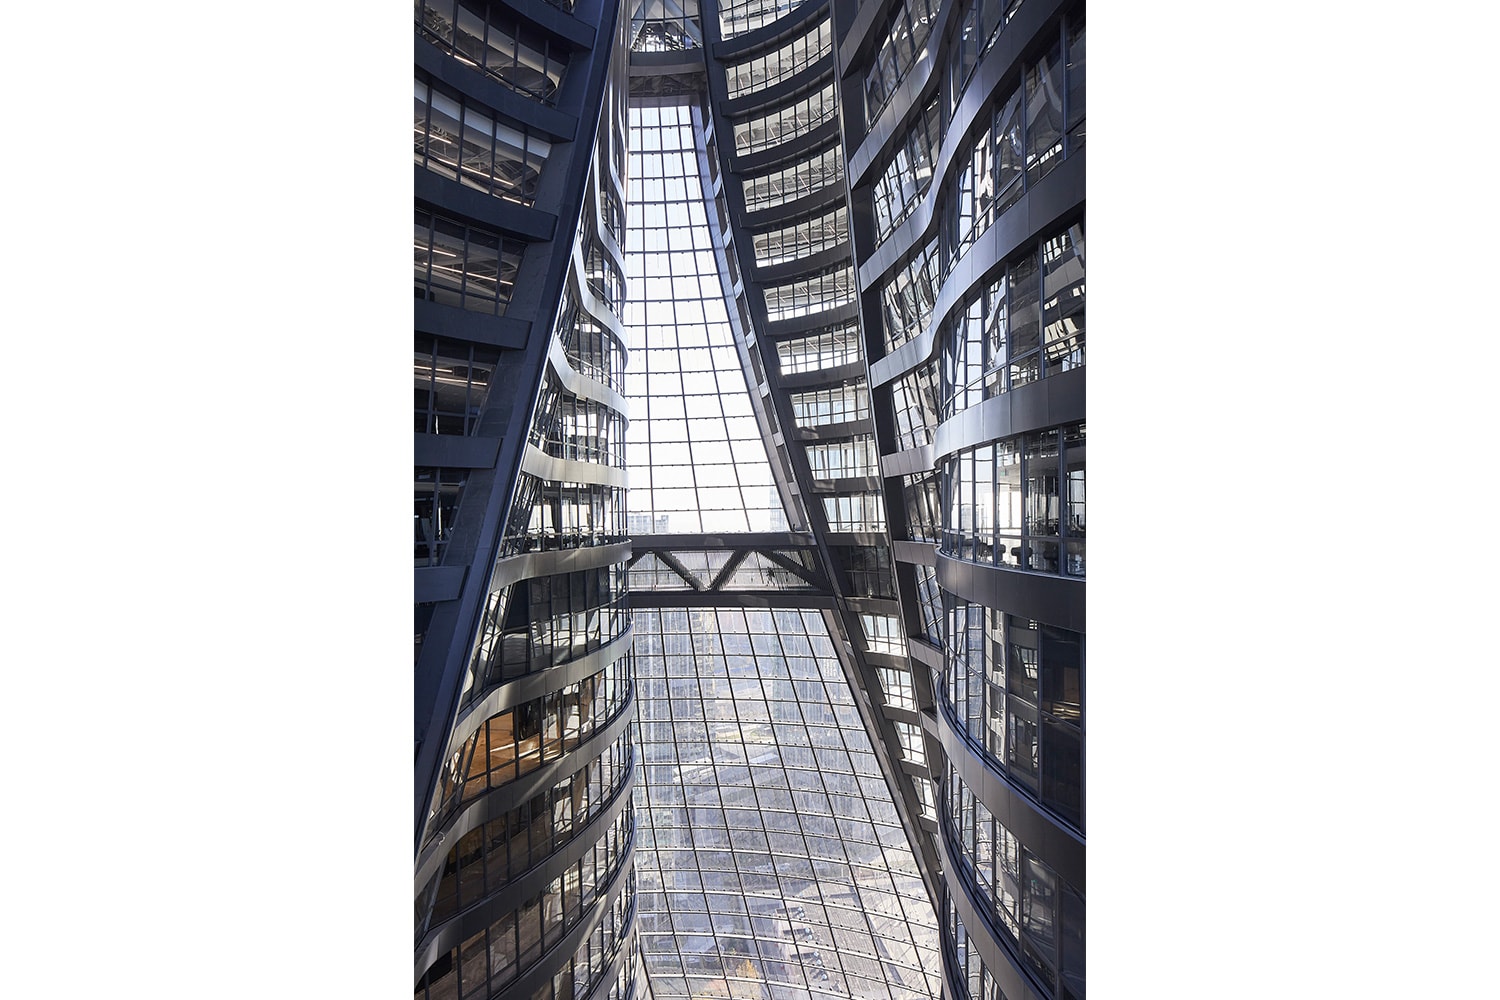 Zaha Hadid Architects Leeza SOHO Opening world's tallest atrium beijing buildings architecture pictures gallery LEED Gold certification 45-story sustainability environment pas de deux